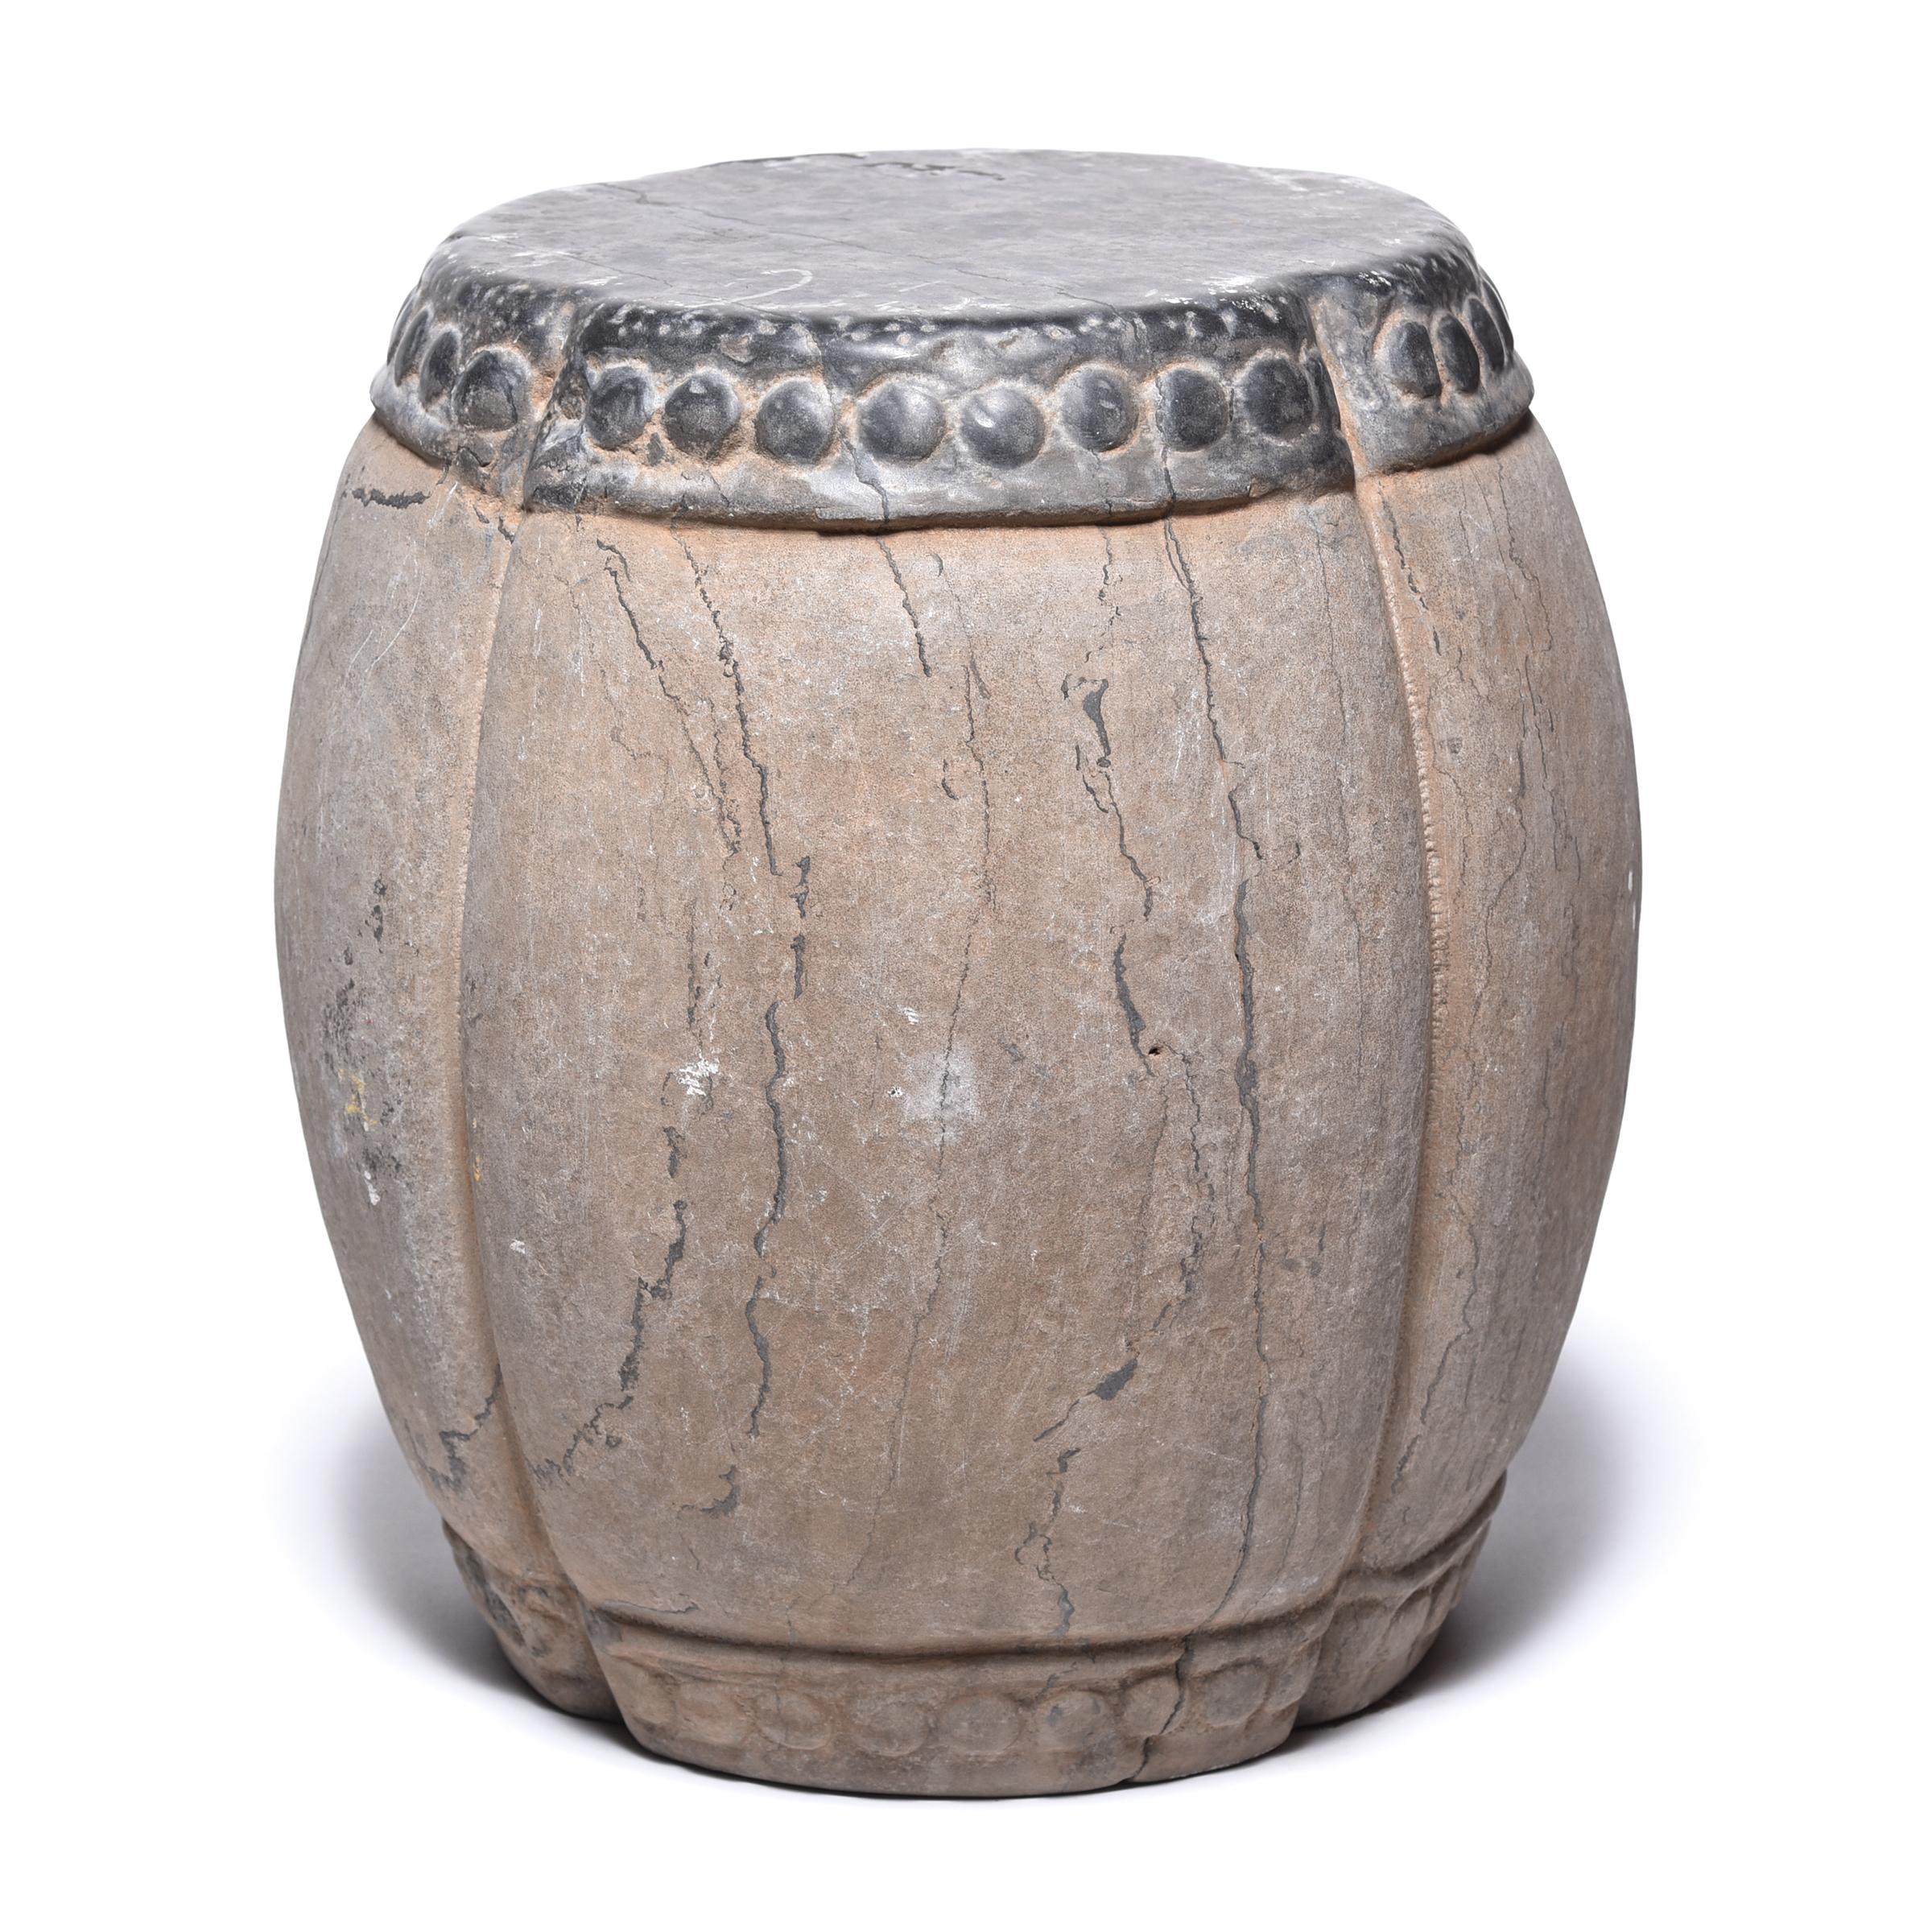 Marked by expressive veining, this handsome stool was carved in China’s Shanxi province out of a piece of solid limestone. Ribbed and rounded, the stool suggests a melon, an ancient Chinese symbol of perpetuity. A pattern of boss-head nails ringing